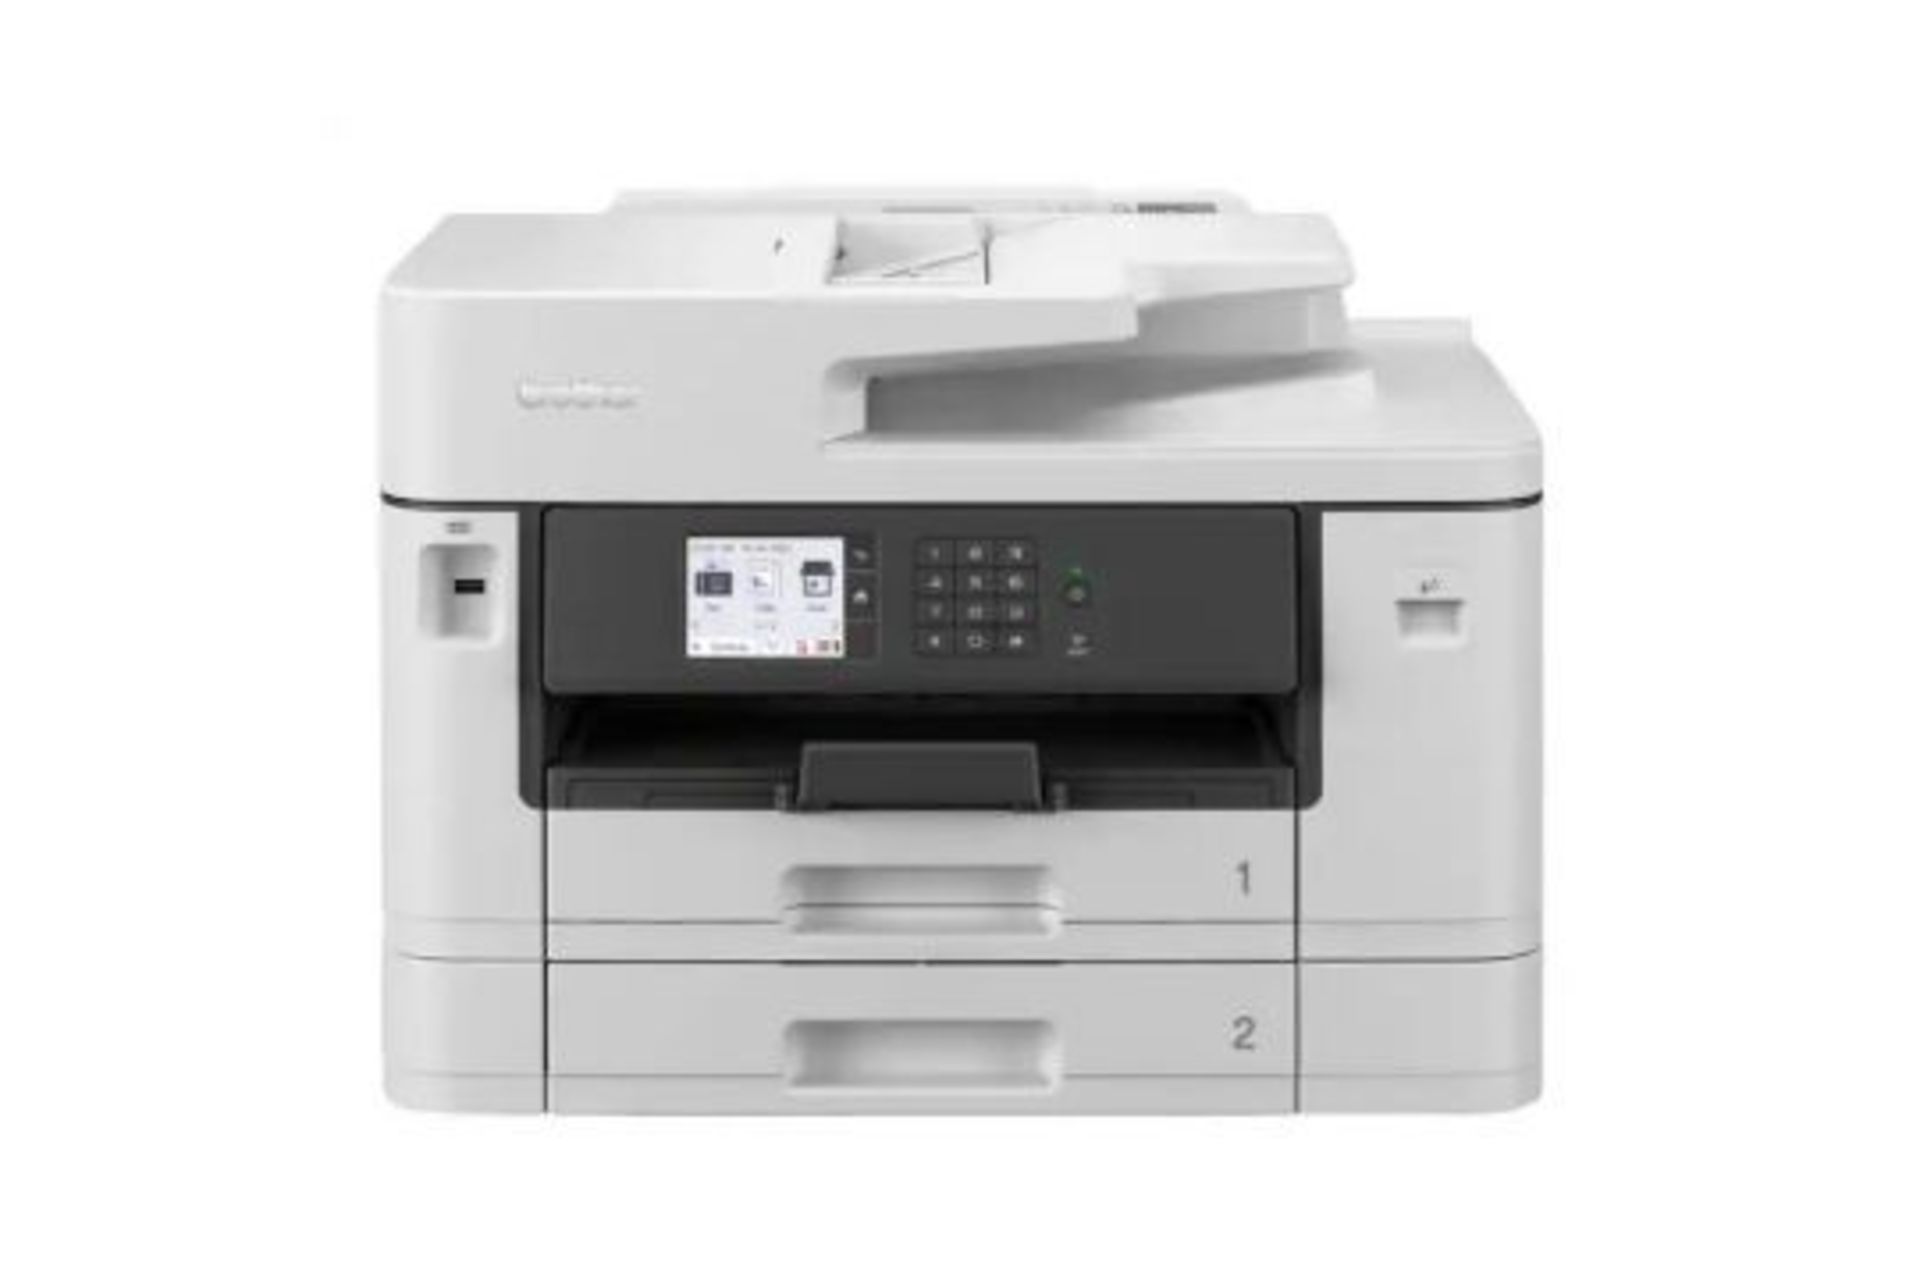 Brother MFC-J5740DW All-in-One Printer Inkjet Wireless. - PCKBW. RPP £314.99. The MFC-J5740DW all-